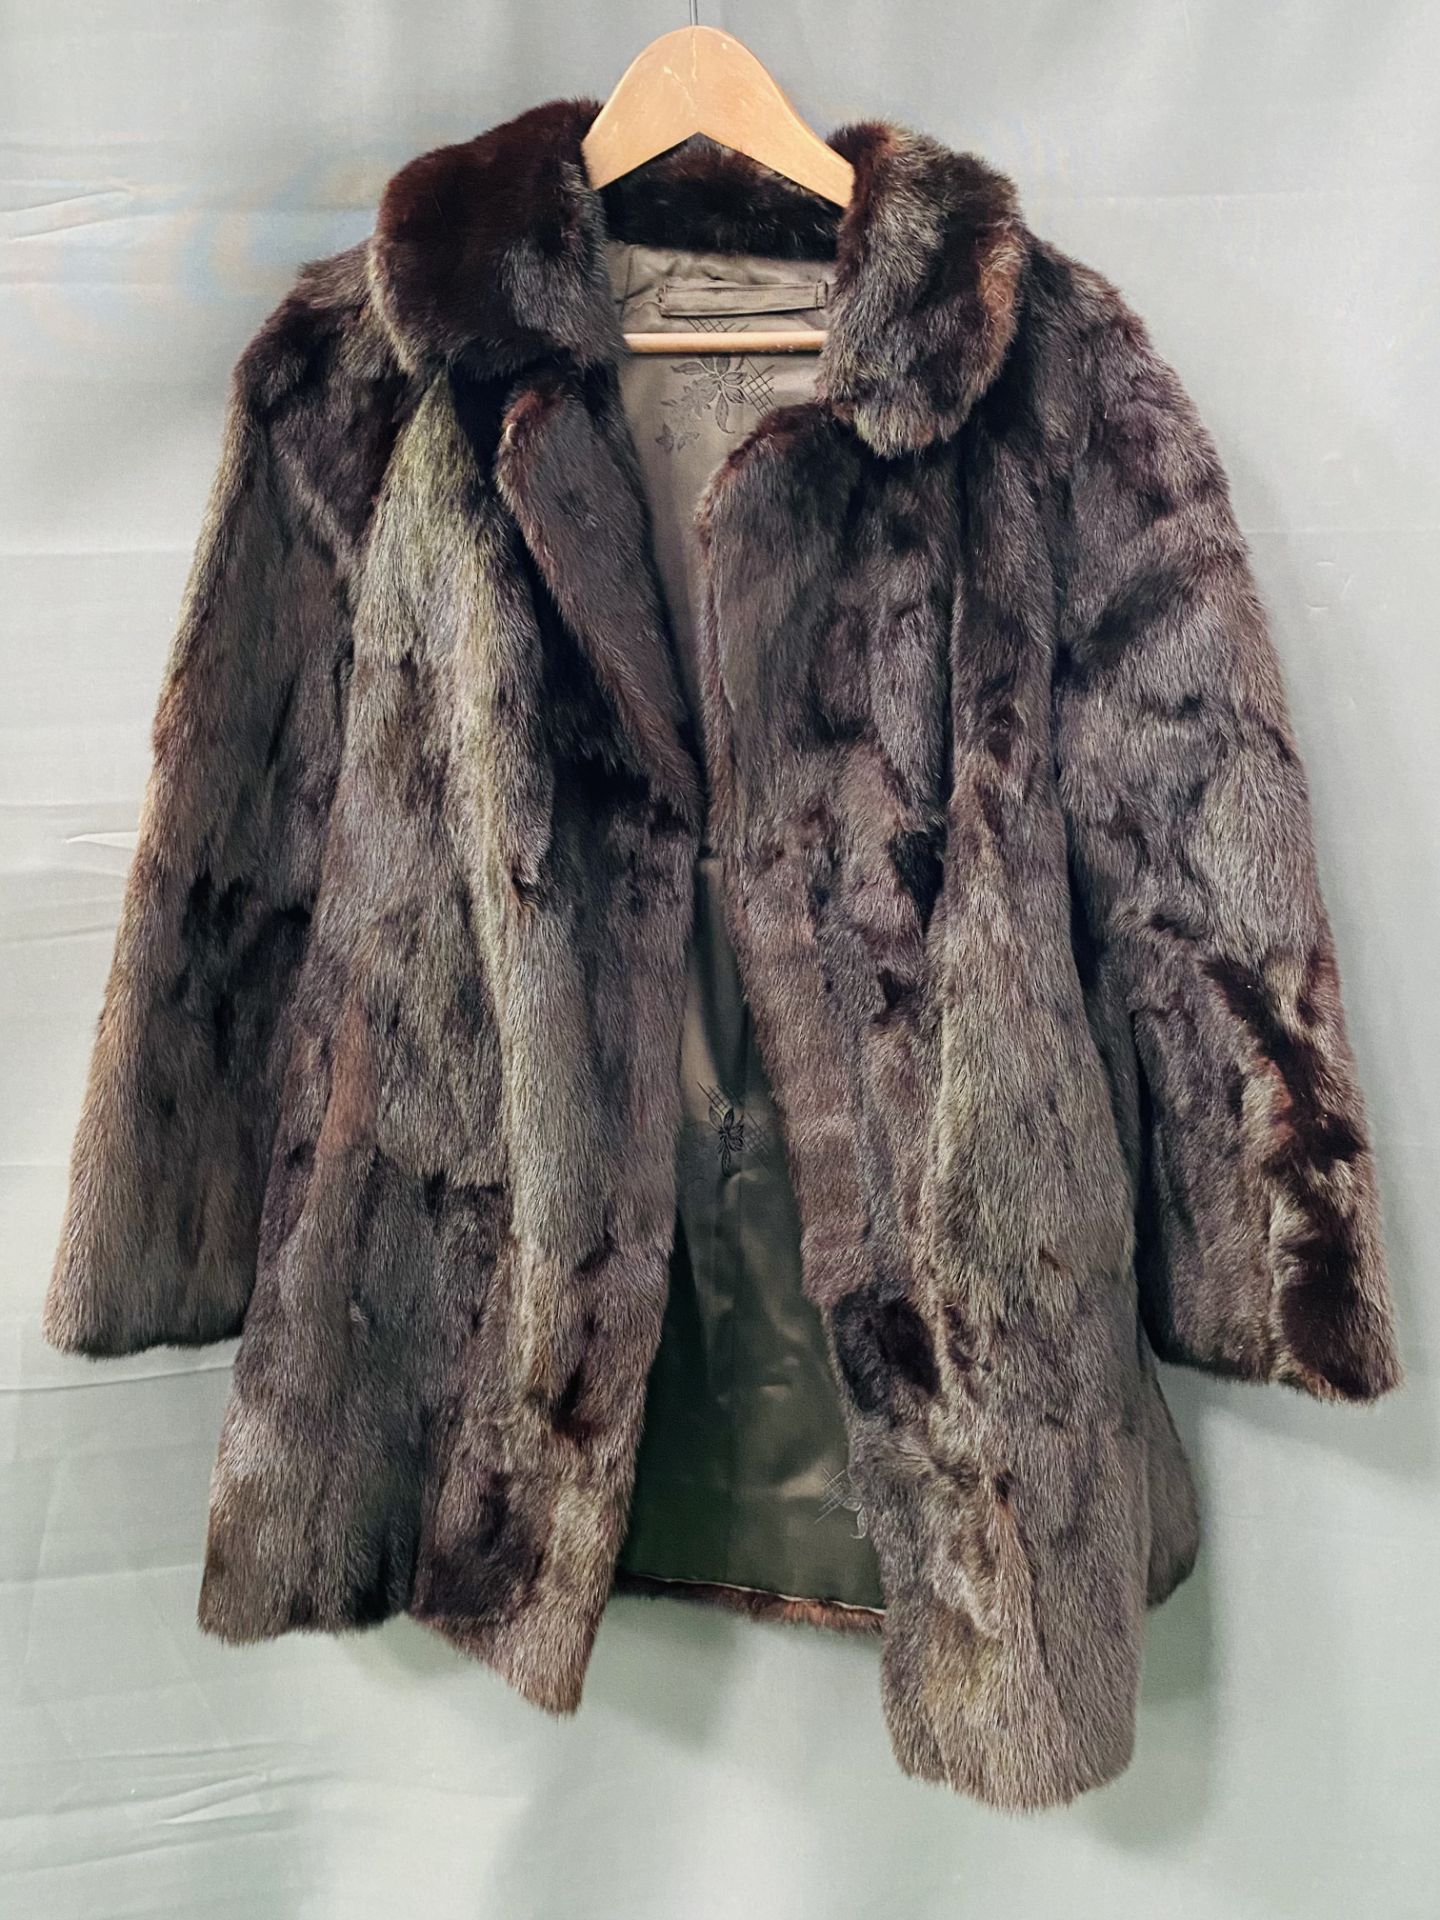 Ladies mink coat together with a fur stole